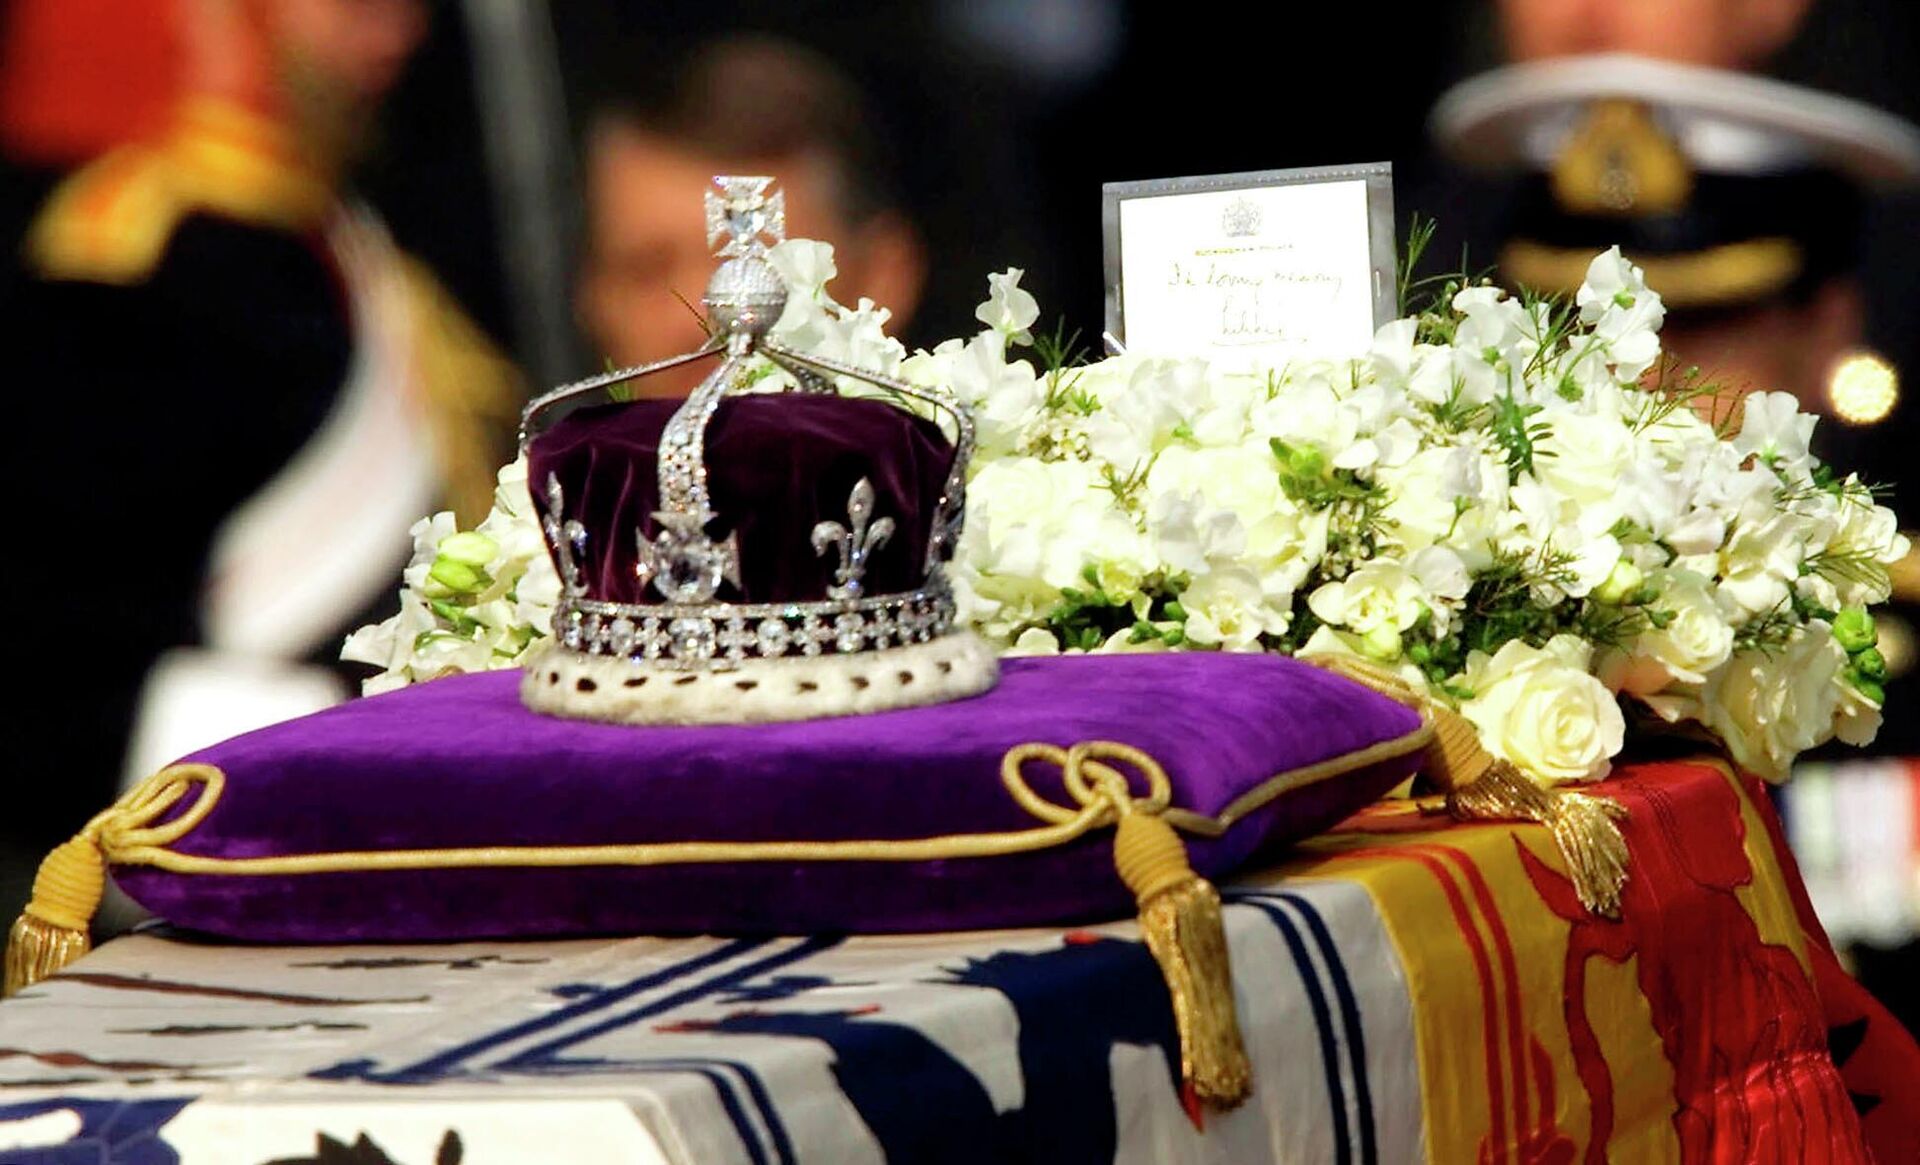 FILE - The Koh-i-noor, or mountain of light, diamond, set in the Maltese Cross at the front of the crown made for Britain's late Queen Mother Elizabeth, is seen on her coffin, along with her personal standard, a wreath and a note from her daughter, Queen Elizabeth II, as it is drawn to London's Westminster Hall in this April 5, 2002. Hundreds of thousands of people are expected to flock to London’s medieval Westminster Hall from Wednesday, Sept. 14, 2022, to pay their respects to Queen Elizabeth II, whose coffin will lie in state for four days until her funeral on Monday. (AP Photo/Alastair Grant, File) - Sputnik International, 1920, 18.09.2022